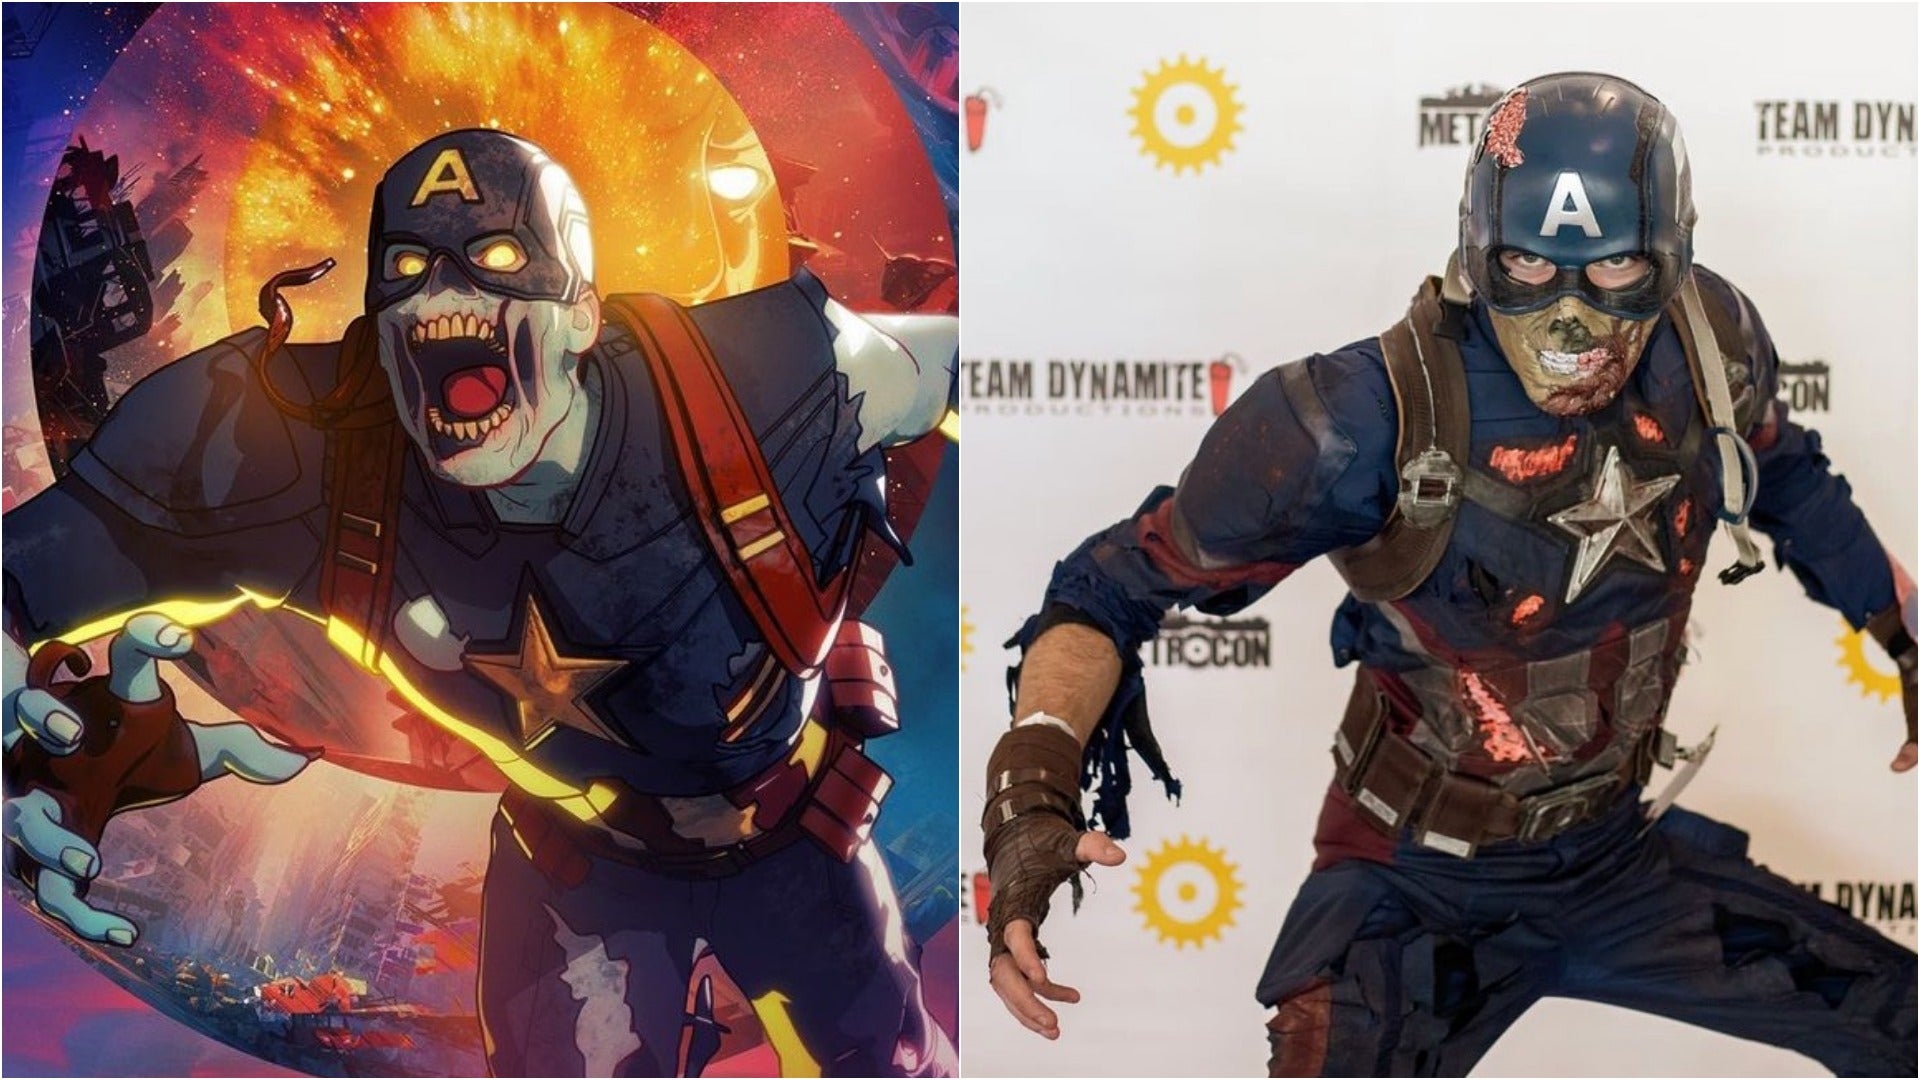 Cap.Mathis_cosplay as Zombie Cap. Photographed by rozo.photo. (Left image courtesy Marvel Studios)